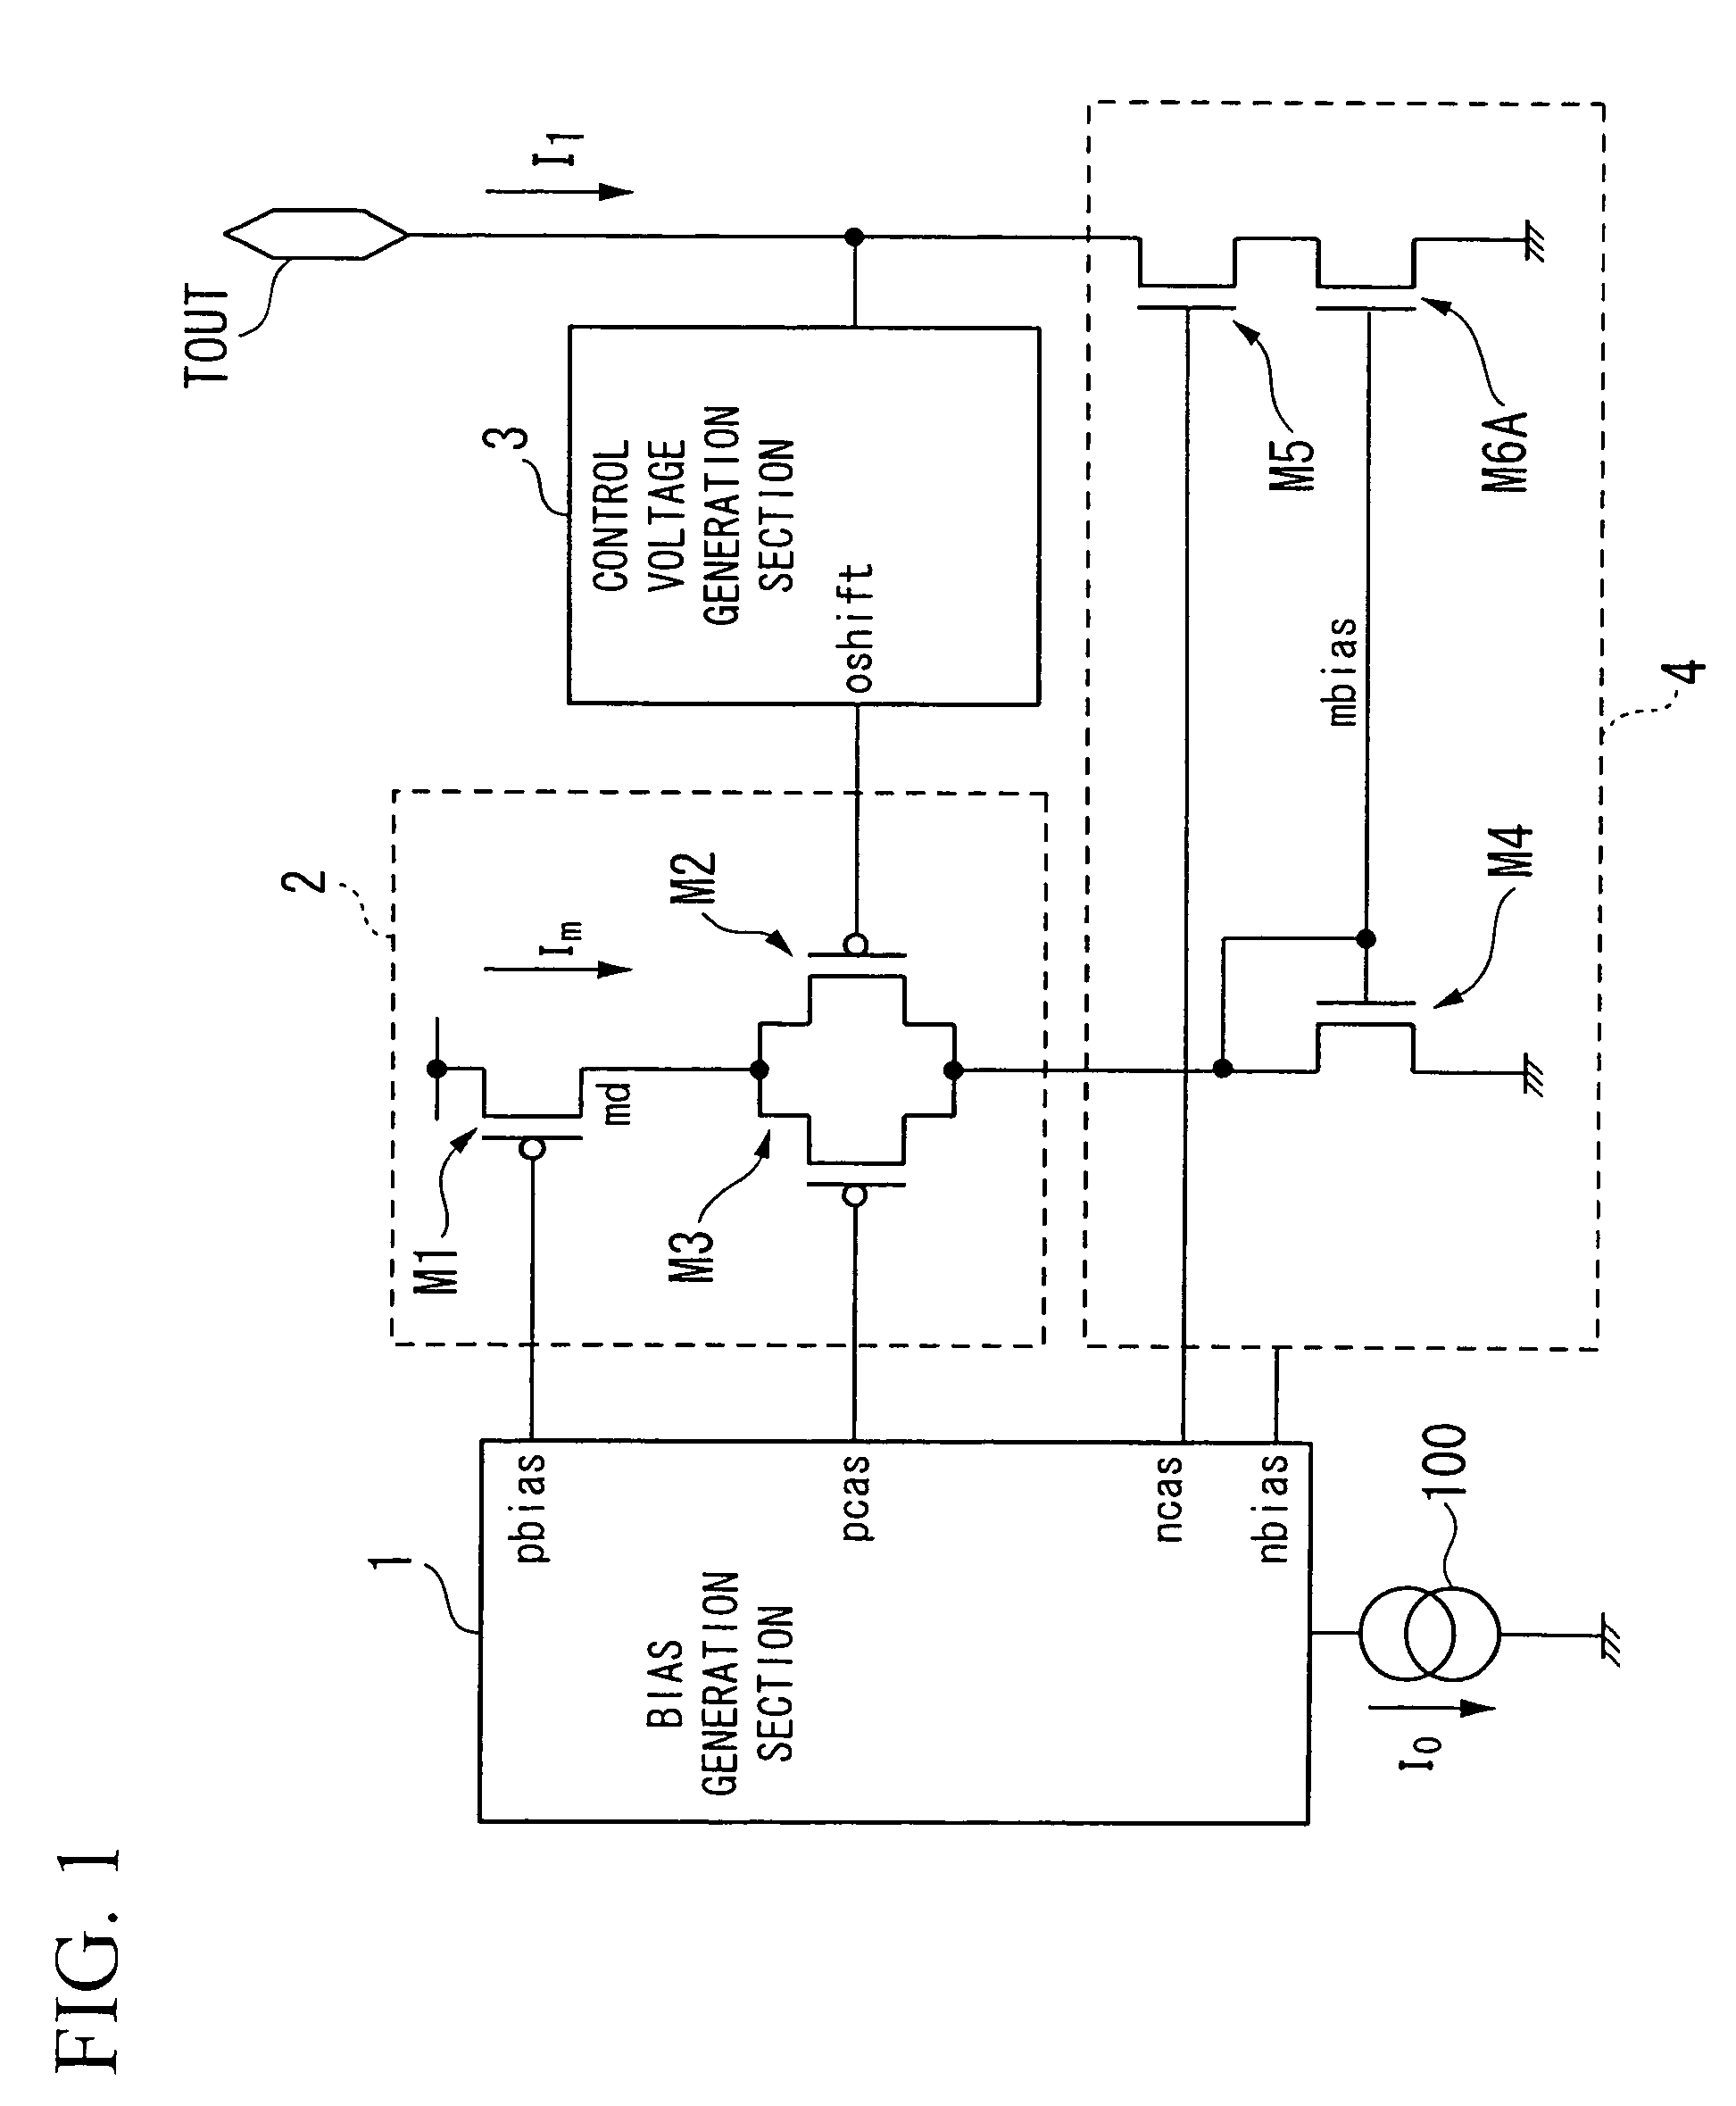 Circuit including first and second transistors coupled between an outpout terminal and a power supply